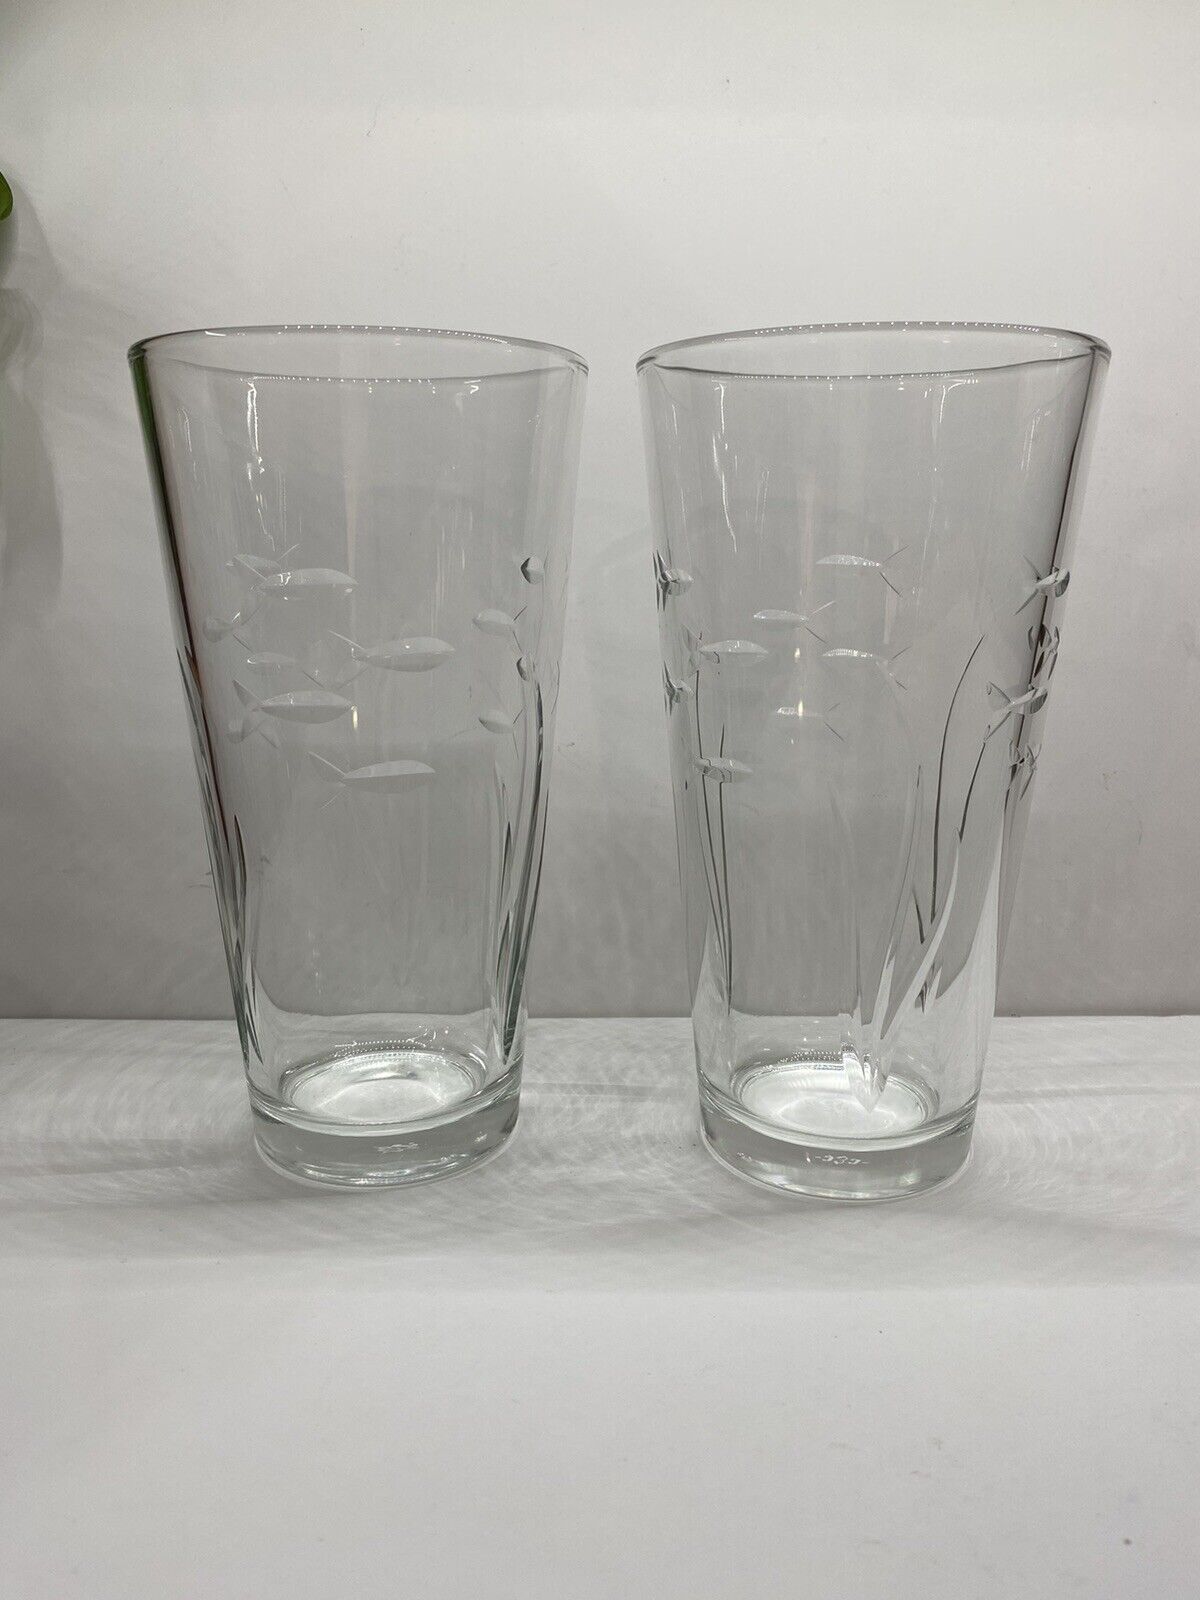 2 Cooler Glasses With Etched Fish Seaweed || Ocean Coastal Theme 20 Oz 6.75”